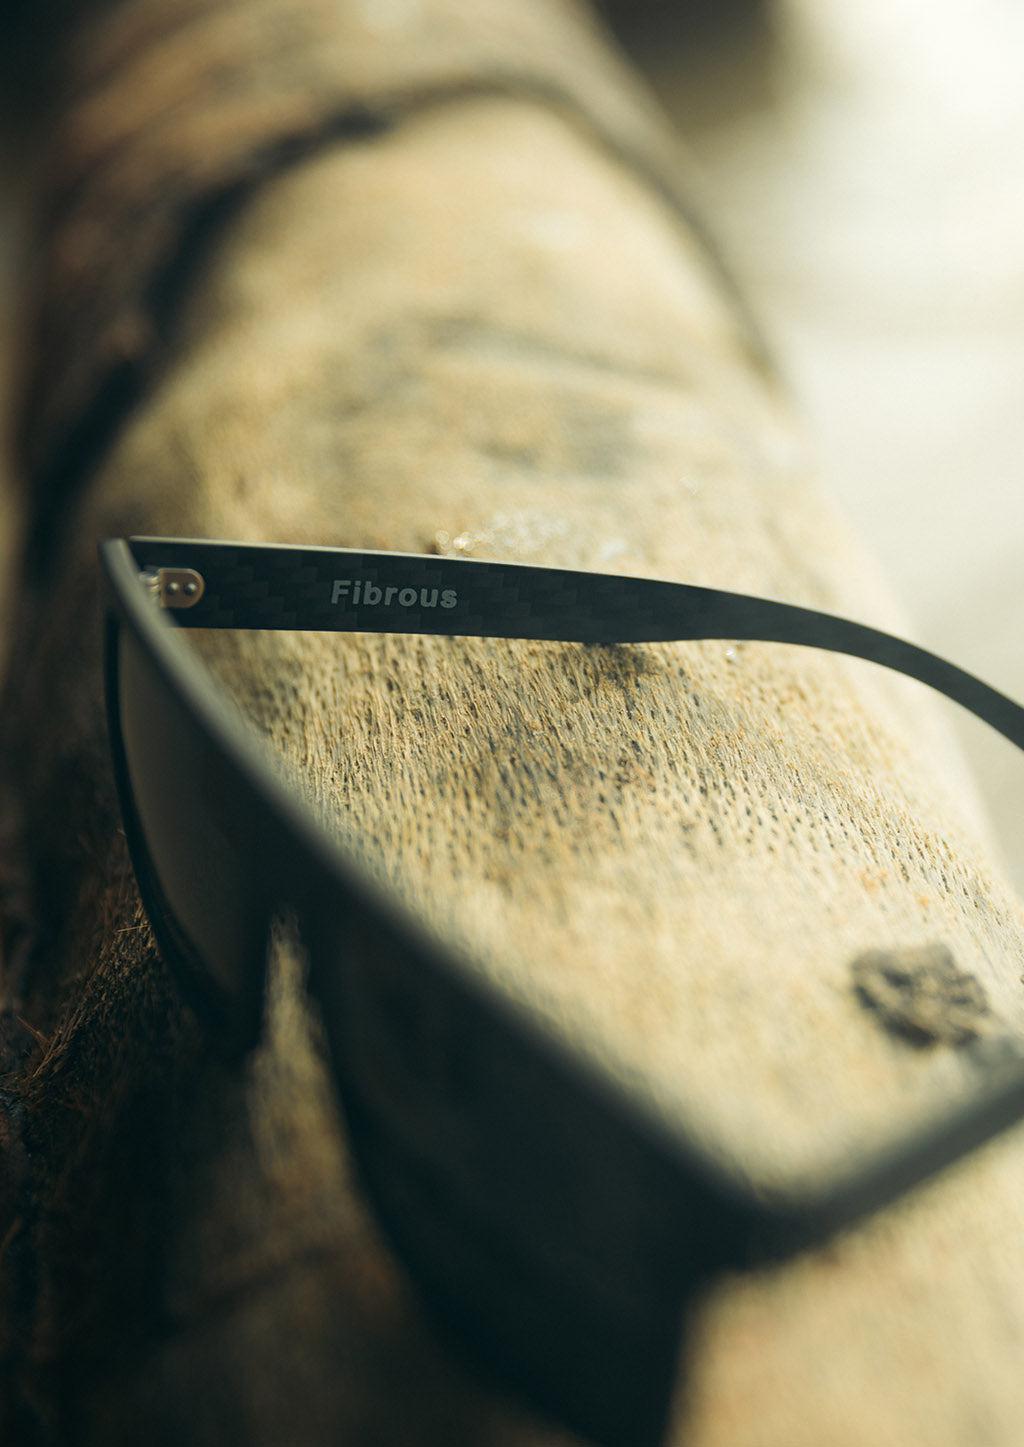 Fibrous stands for quality and style with carbon fiber.